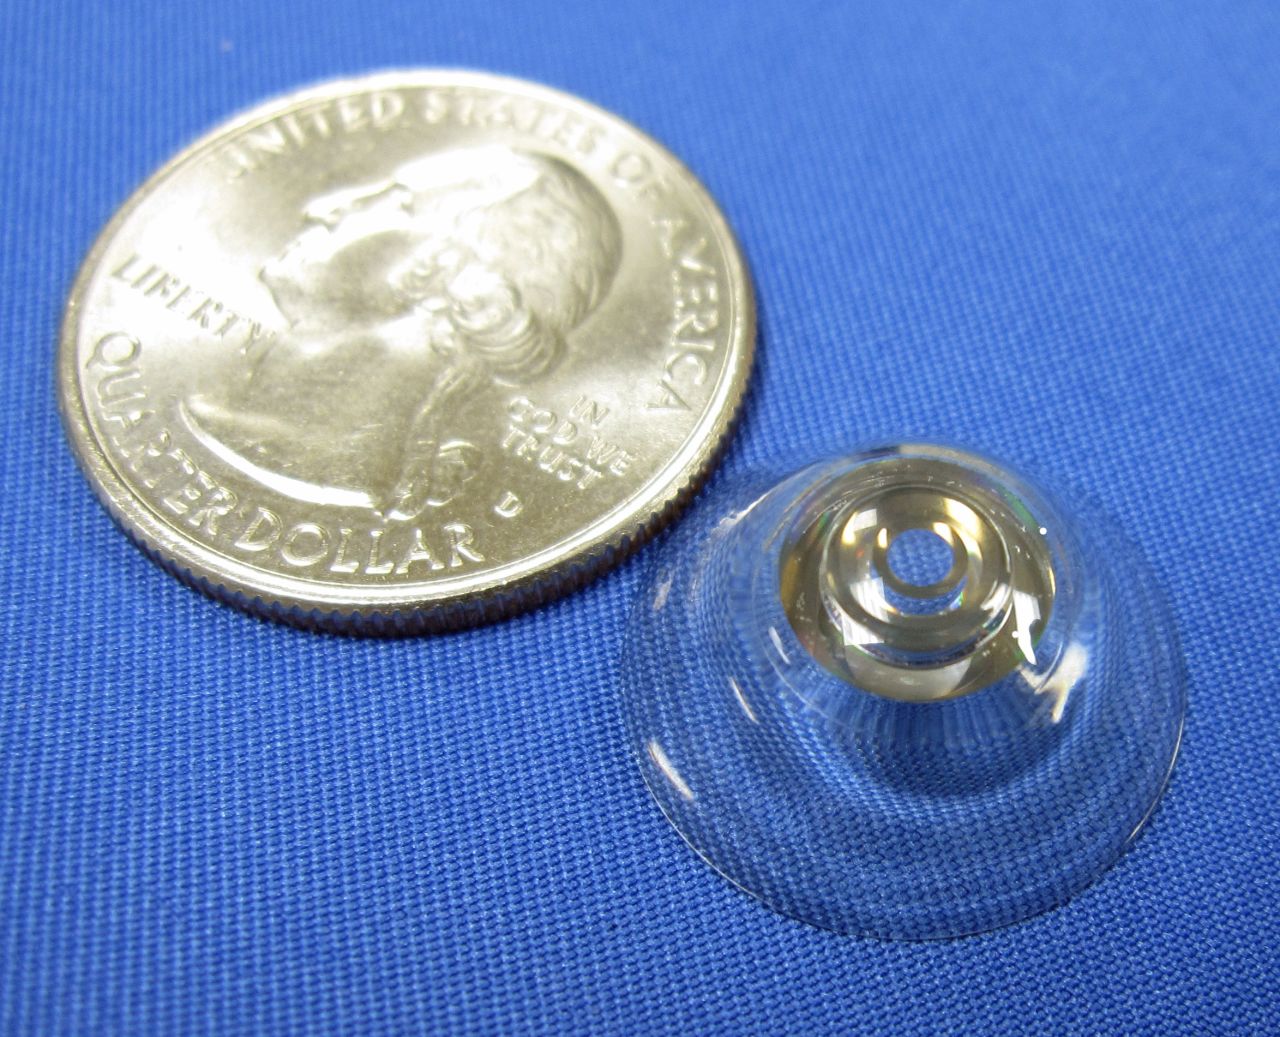 Scientists are developing a telescopic contact lens to magnify human vision, which could help people with age-related macular degeneration.